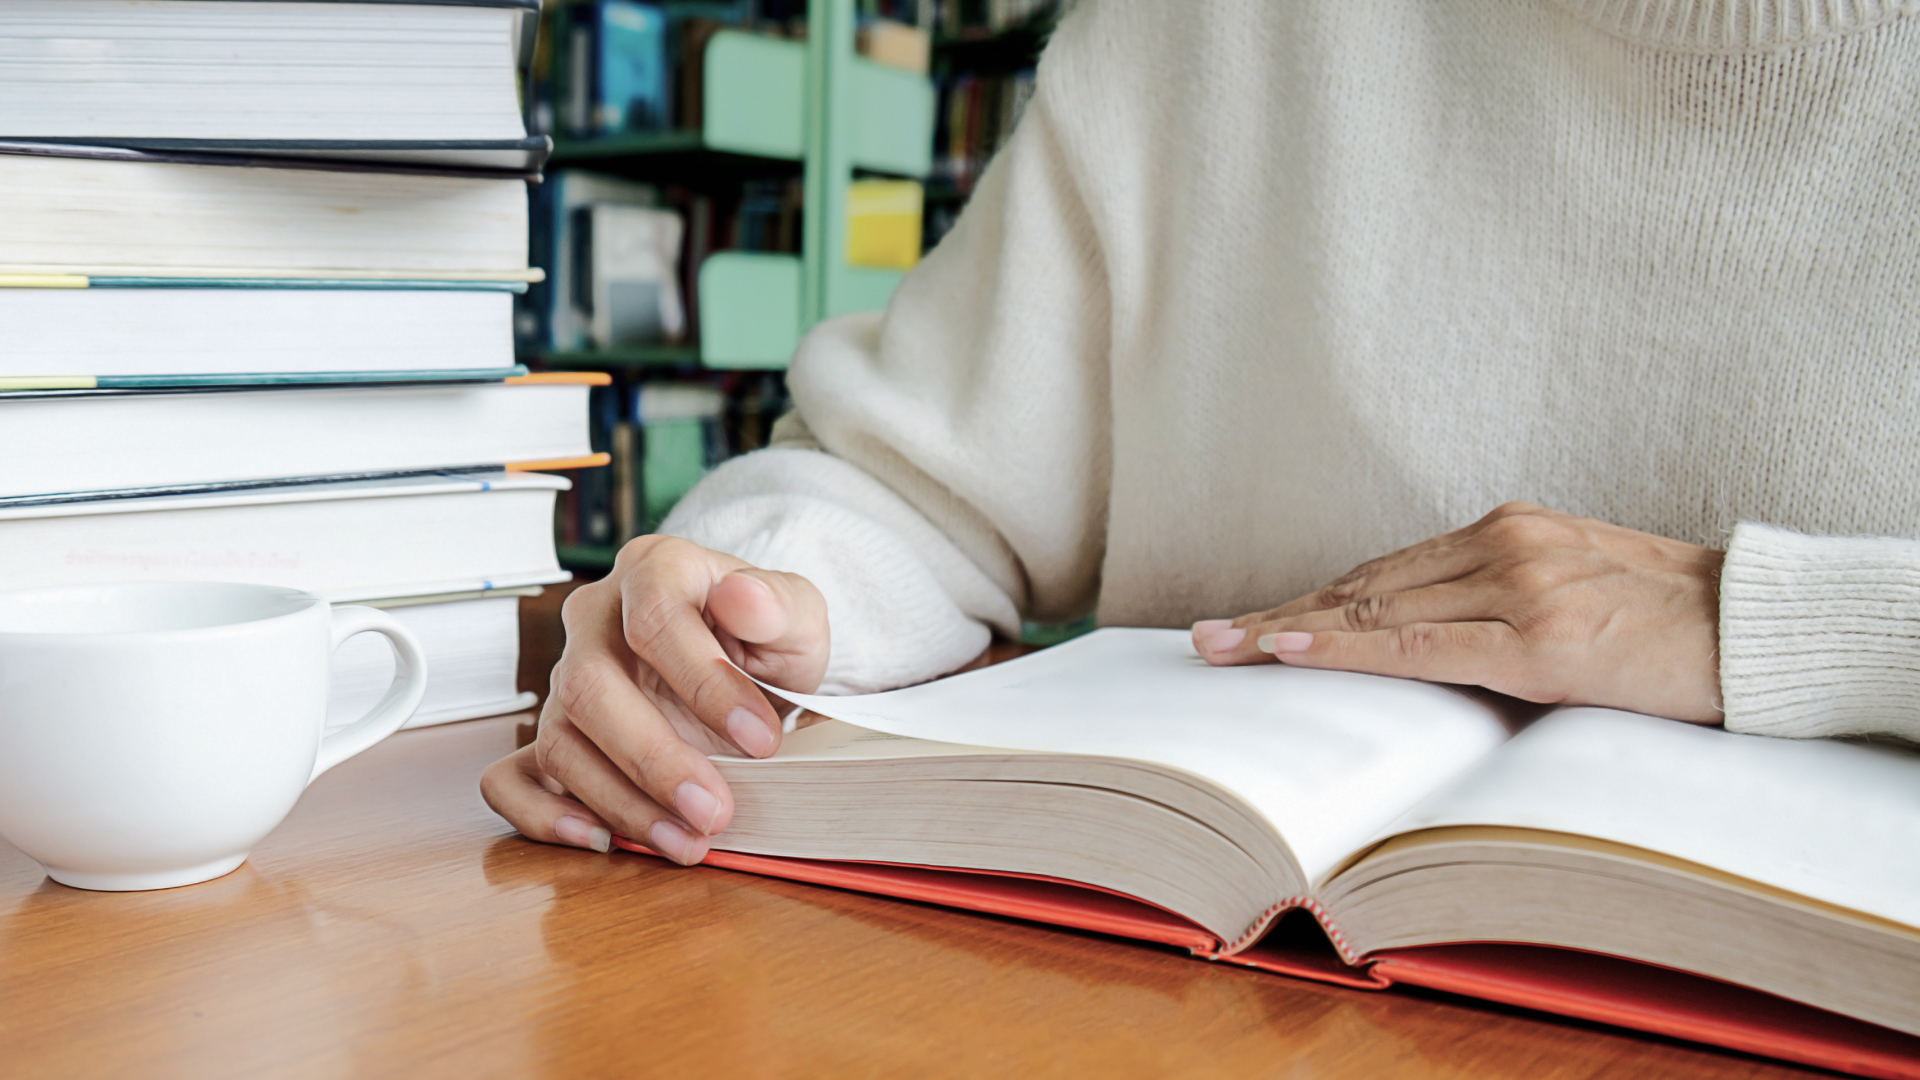 5 Best Books for Small Business Owners in 2023: Recommended Reads